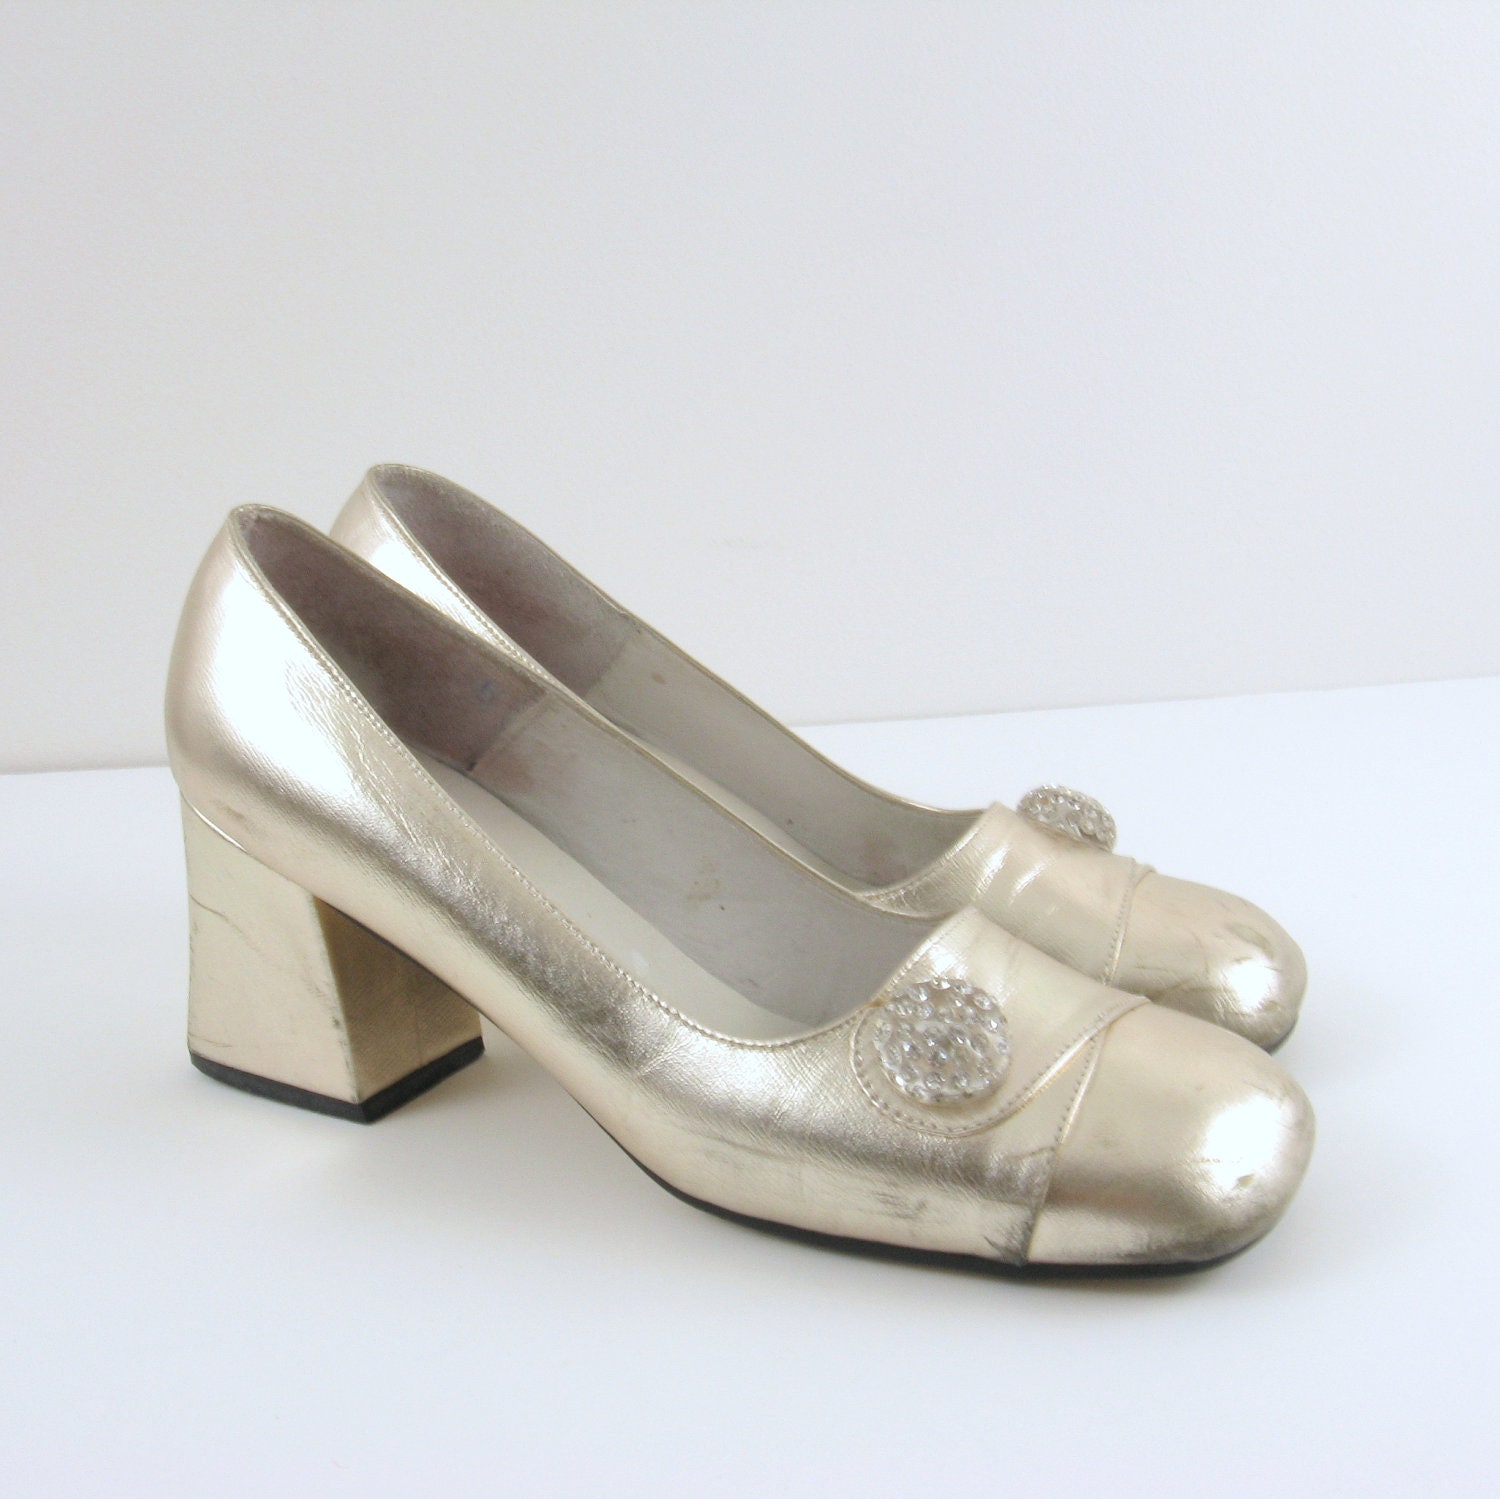 Vintage Gold Pumps - 1960s Metallic Shoes Size 8 by Ko See Shoe Company - TwoMoxie